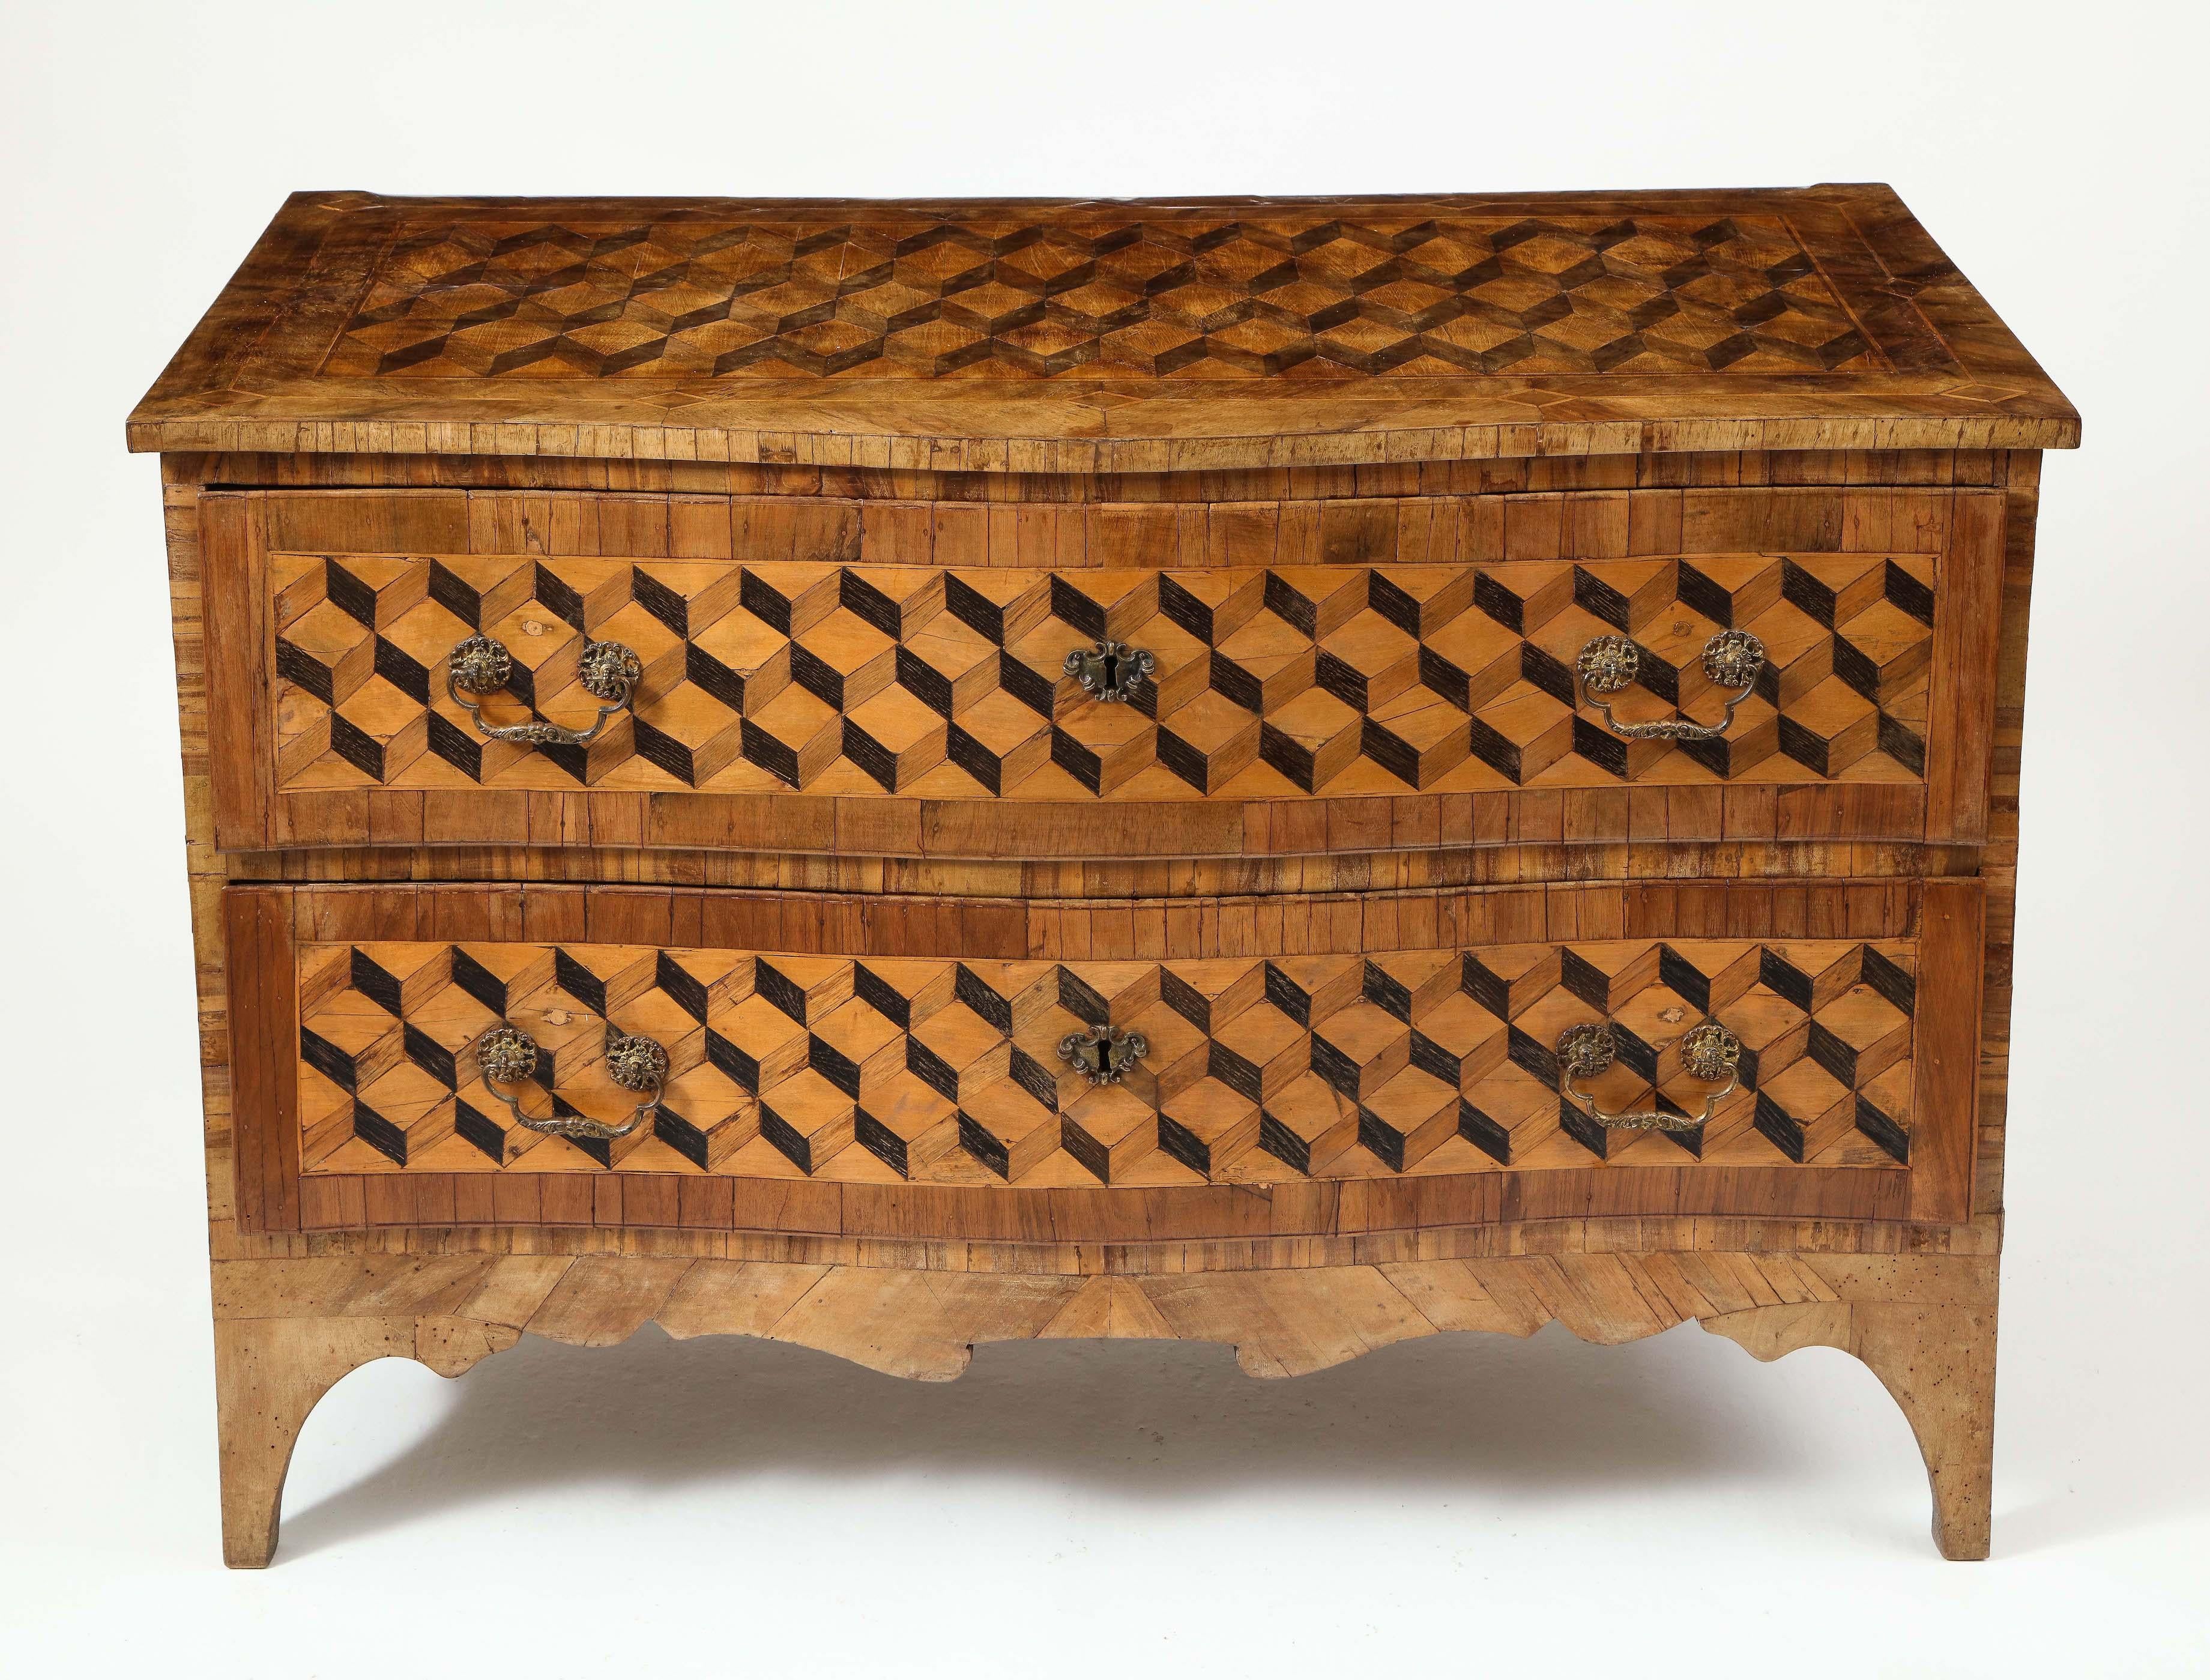 Of serpentine form; with broad walnut banding throughout and inlaid with trompe l'oeil geometric parquetry panels incorporating fruitwood, olive wood, and purpleheart; mounted with silver hardware; fitted with two long drawers mounted with silver